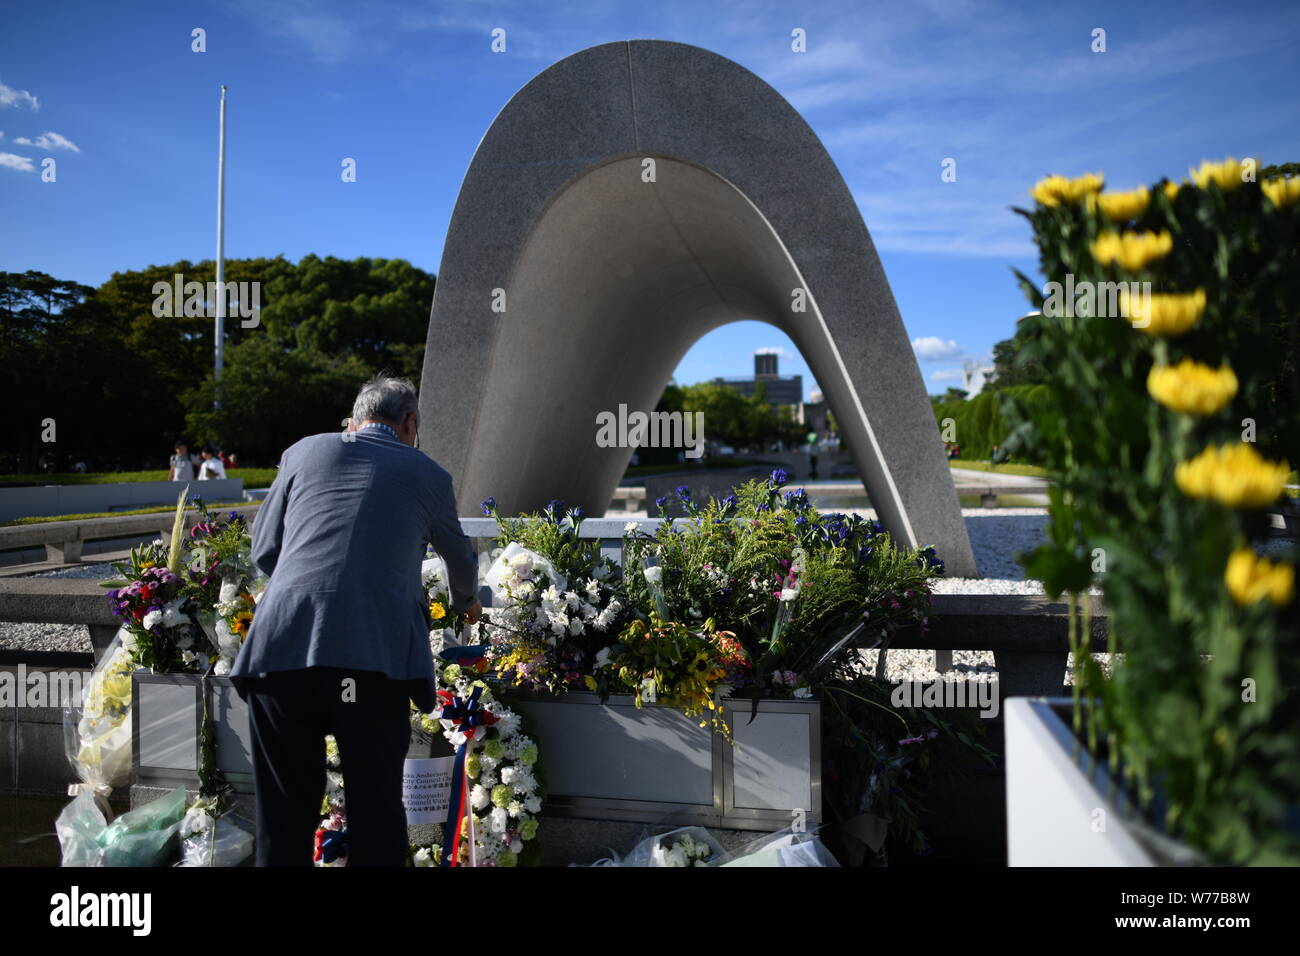 HIROSHIMA, JAPAN - AUGUST 05: A man lays flowers and pray for the atomic bomb victims in front of the cenotaph at the Hiroshima Peace Memorial Park in Hiroshima, western Japan on August 5, 2019, a day before the 74th anniversary ceremony of the attack. (Photo: Richard Atrero de Guzman/ AFLO) Credit: Aflo Co. Ltd./Alamy Live News Stock Photo